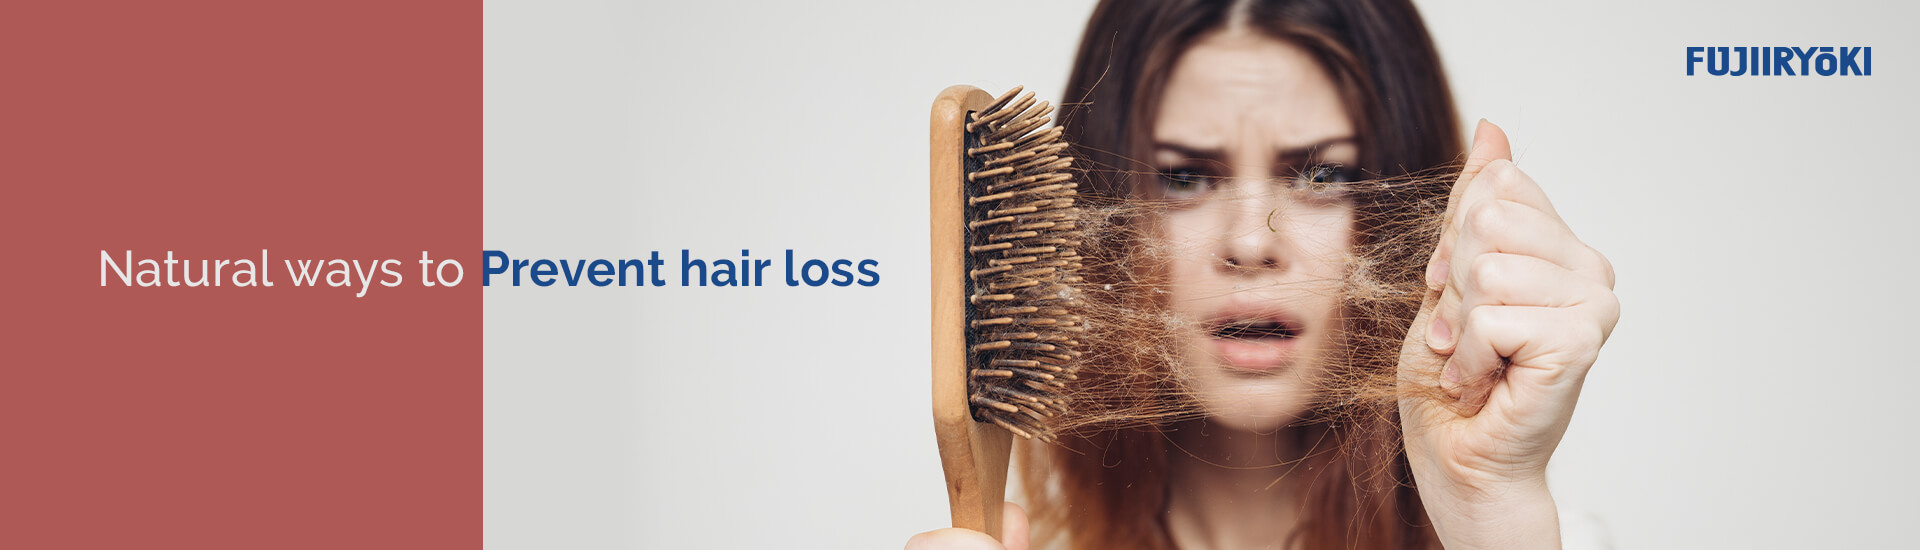 Natural ways to prevent hair loss